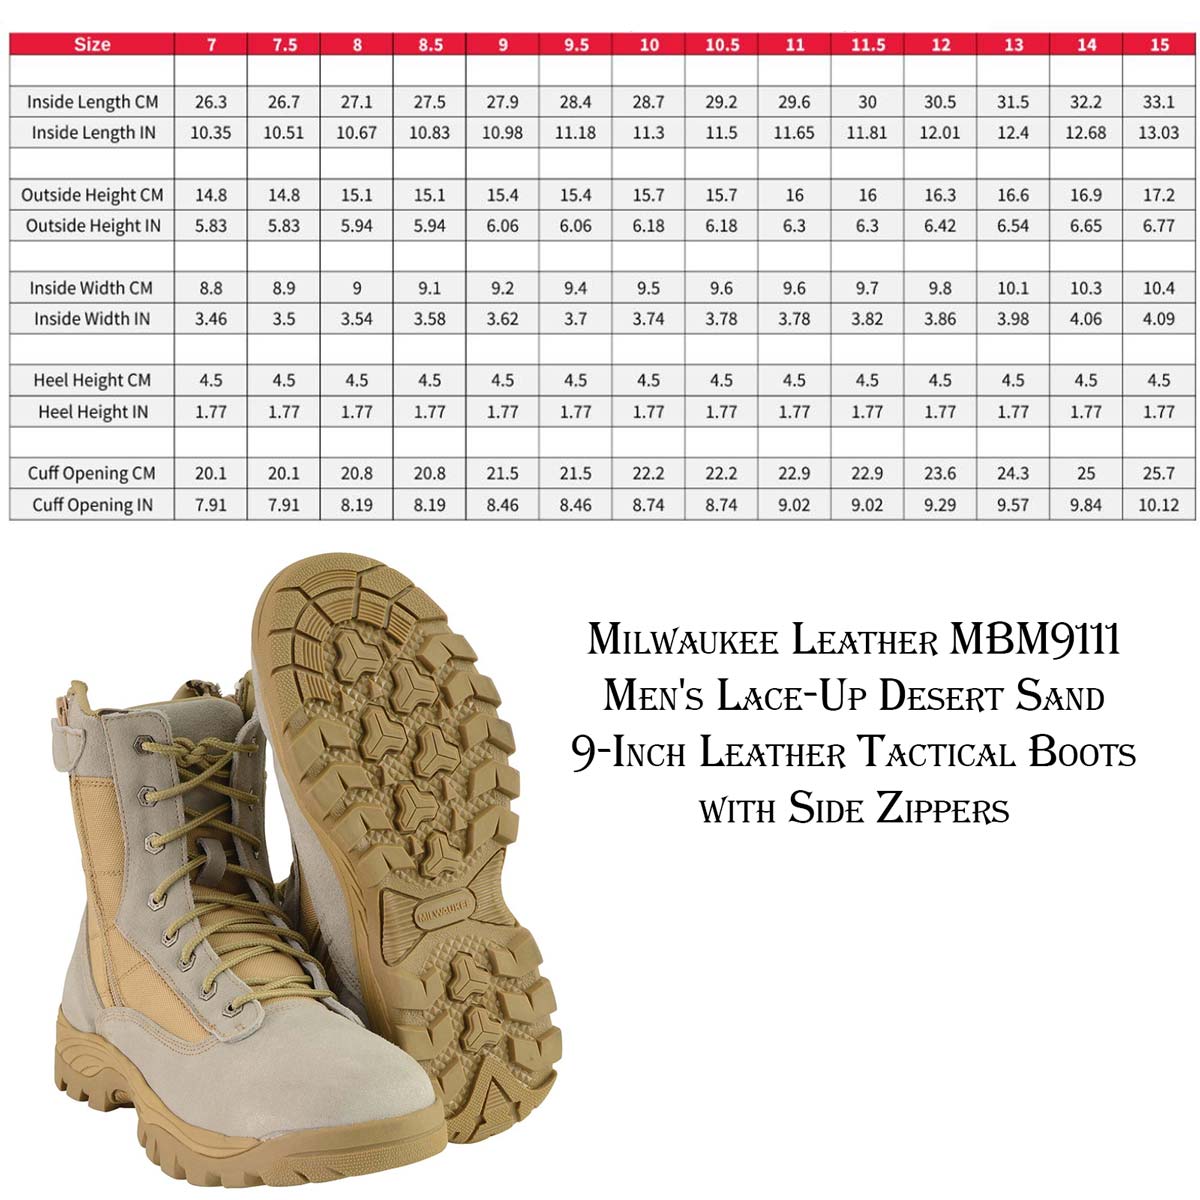 Milwaukee Leather MBM9111 Men's Lace-Up Desert Sand 9-Inch Leather Swat Style-Tactical Motorcycle Biker Boots